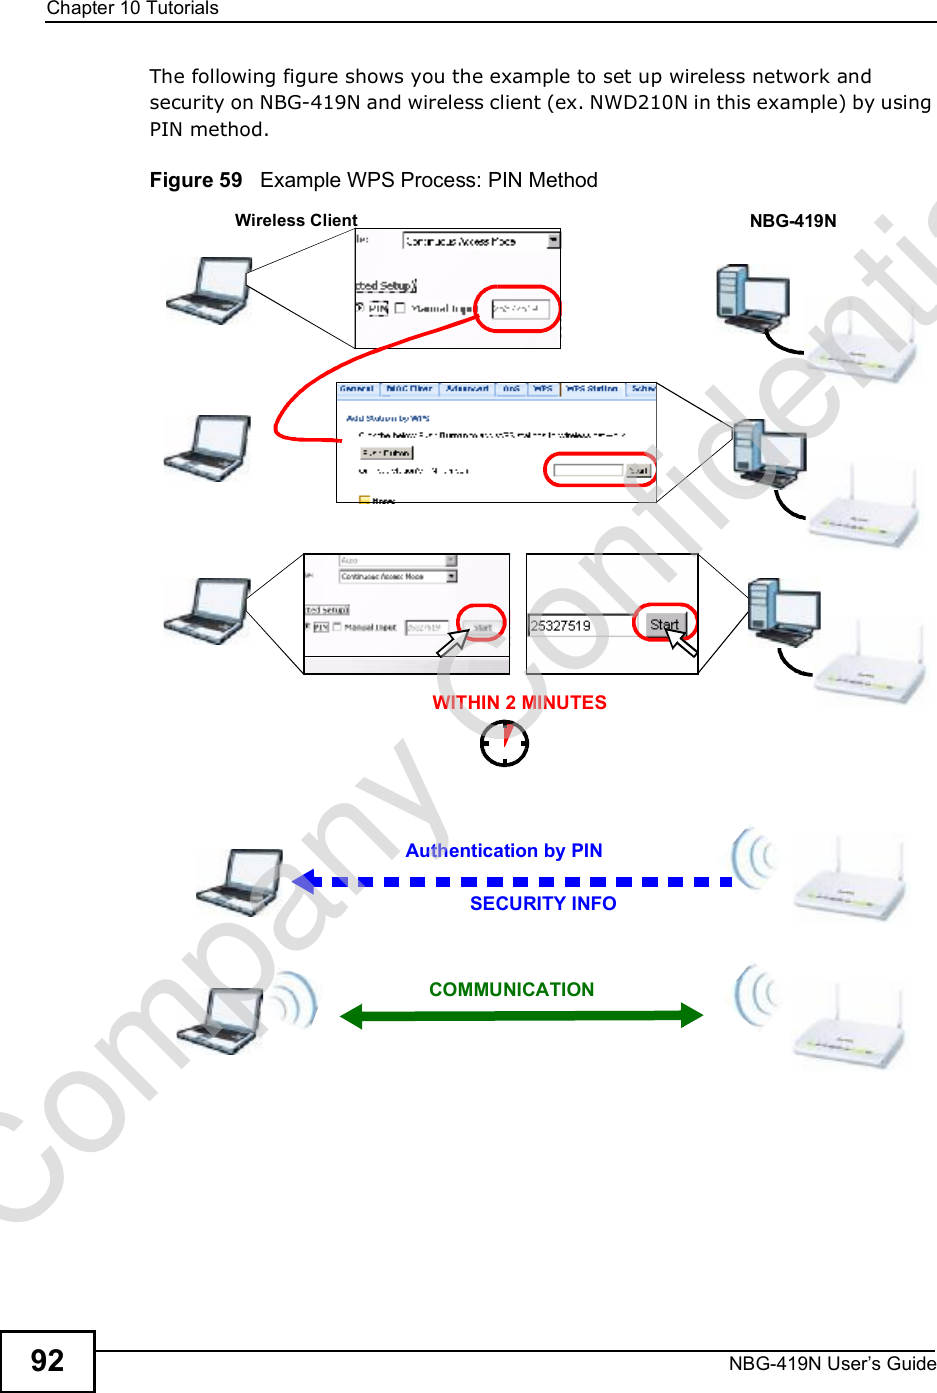 Chapter 10TutorialsNBG-419N User s Guide92The following figure shows you the example to set up wireless network and security on NBG-419N and wireless client (ex. NWD210N in this example) by using PIN method. Figure 59   Example WPS Process: PIN MethodAuthentication by PINSECURITY INFOWITHIN 2 MINUTESWireless Client NBG-419NCOMMUNICATIONCompany Confidential